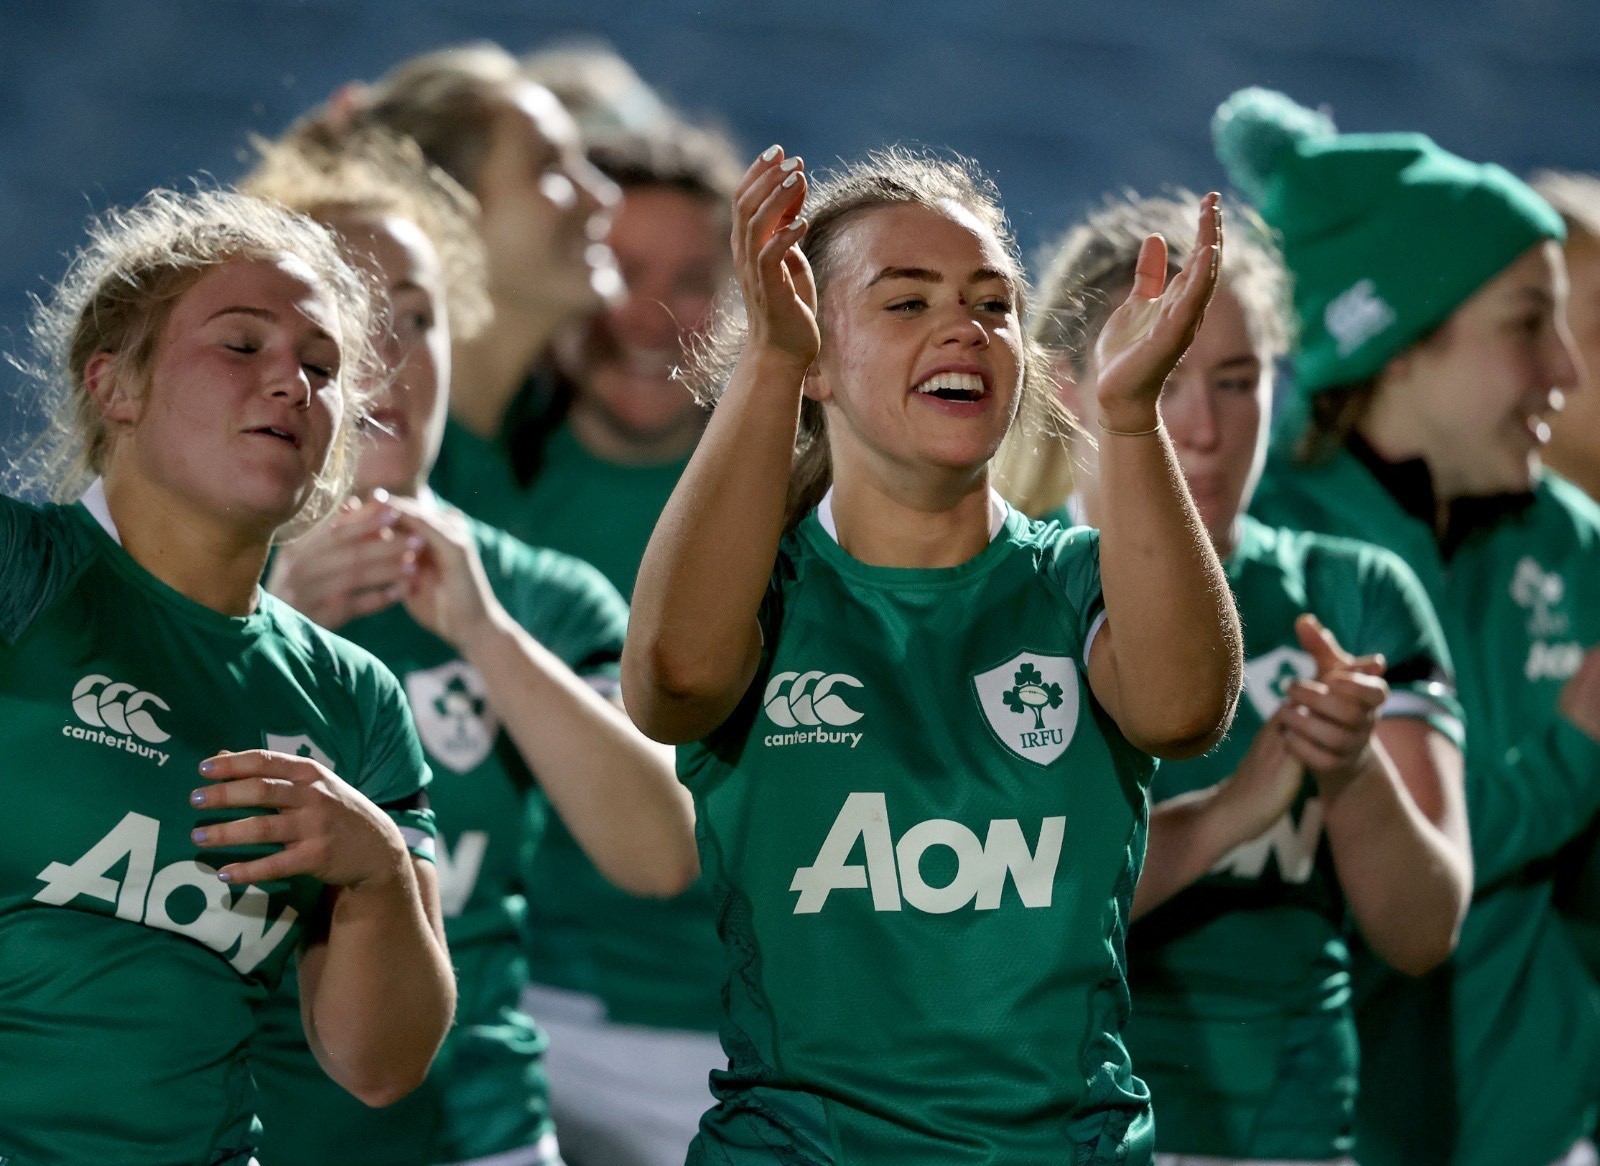 Interview / Rugby - Mayw competes with Ireland for the first time: Woman Sports's 